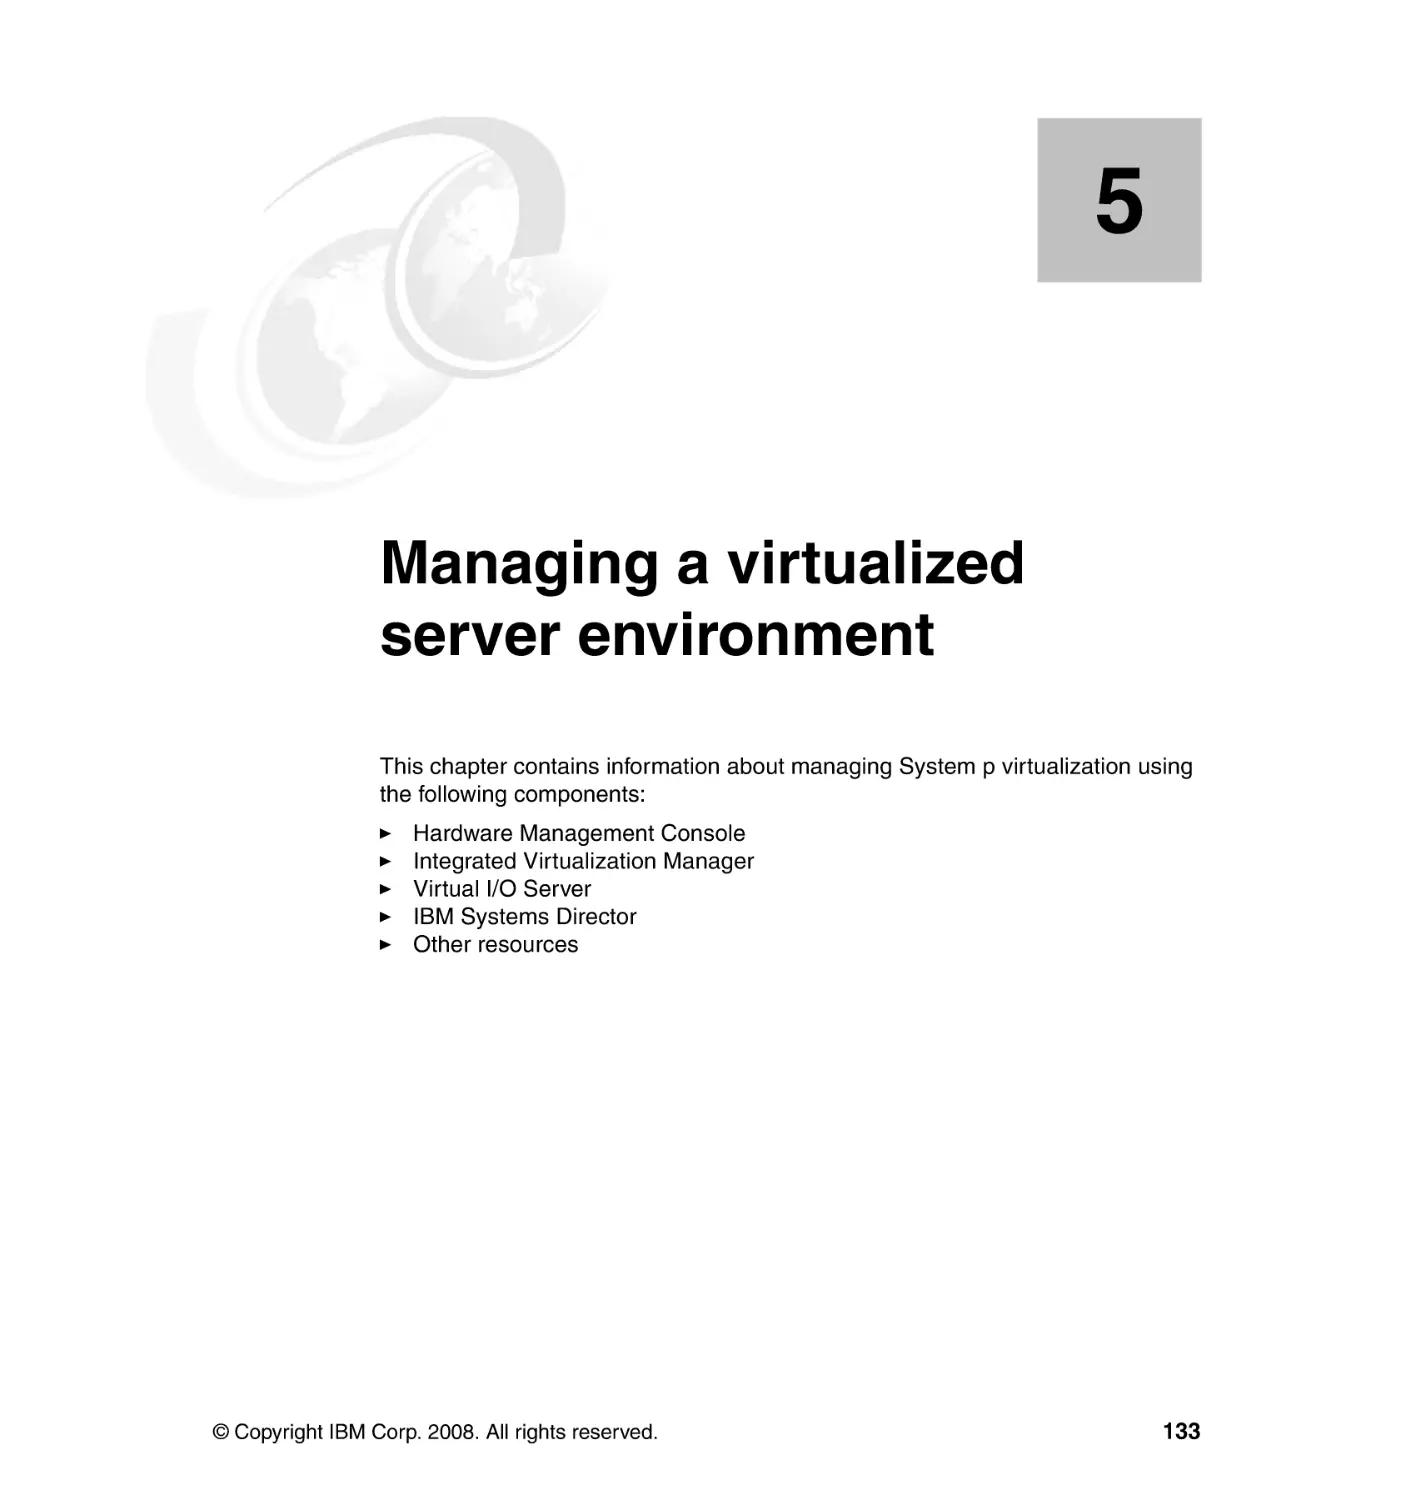 Chapter 5. Managing a virtualized server environment